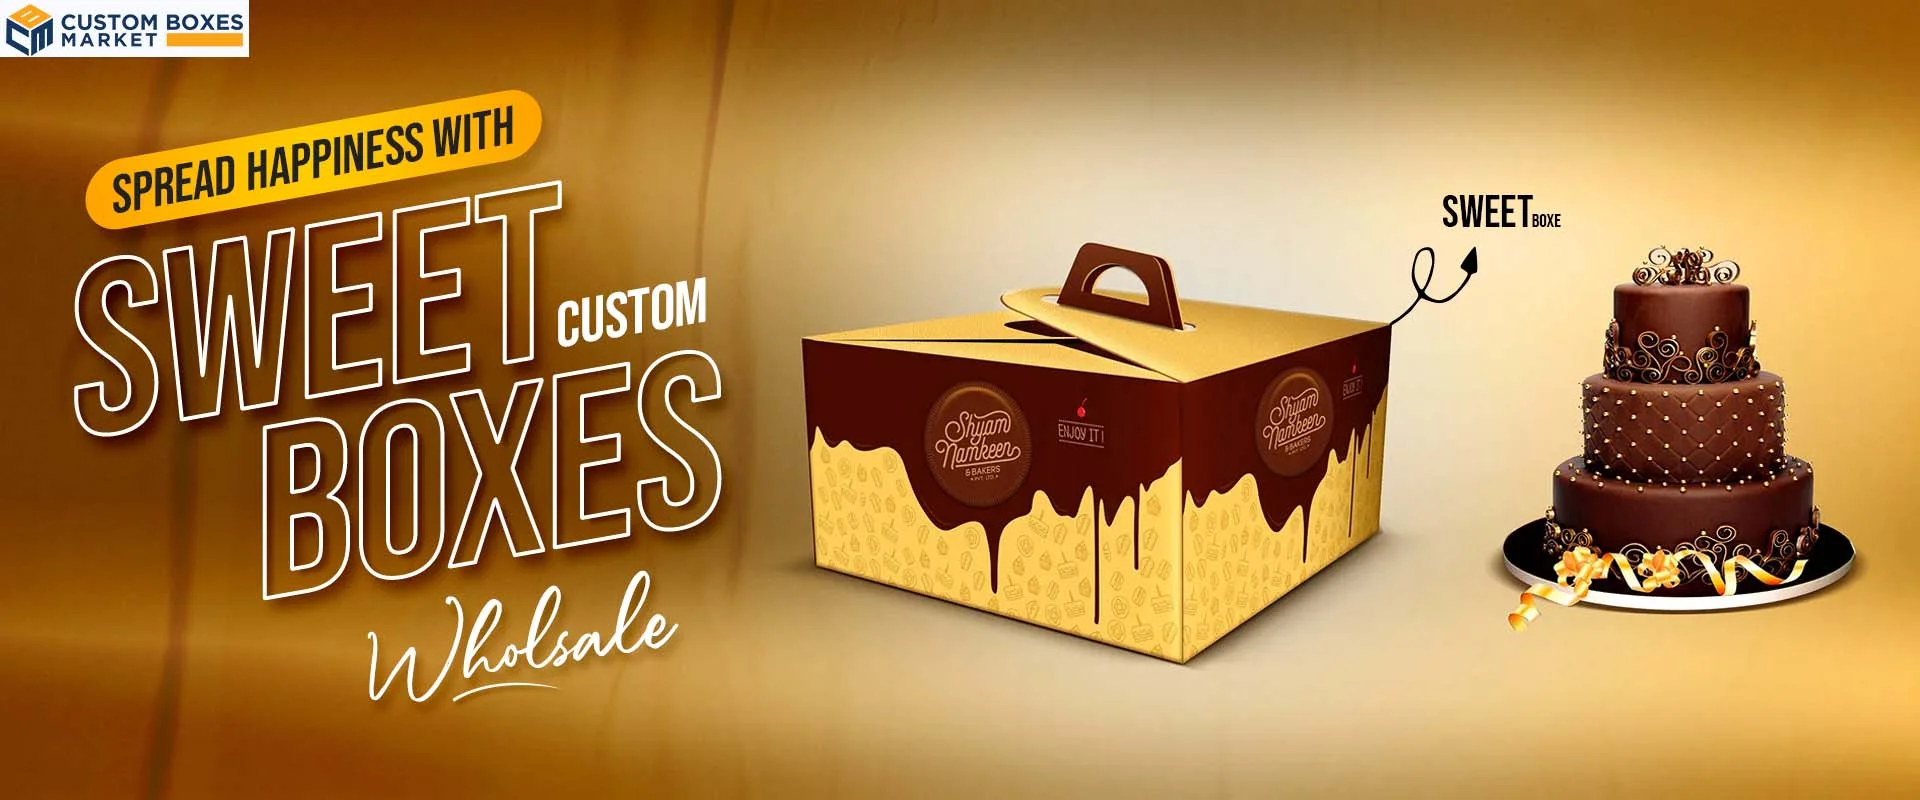 Spread Happiness With Custom Sweet Boxes Wholesale